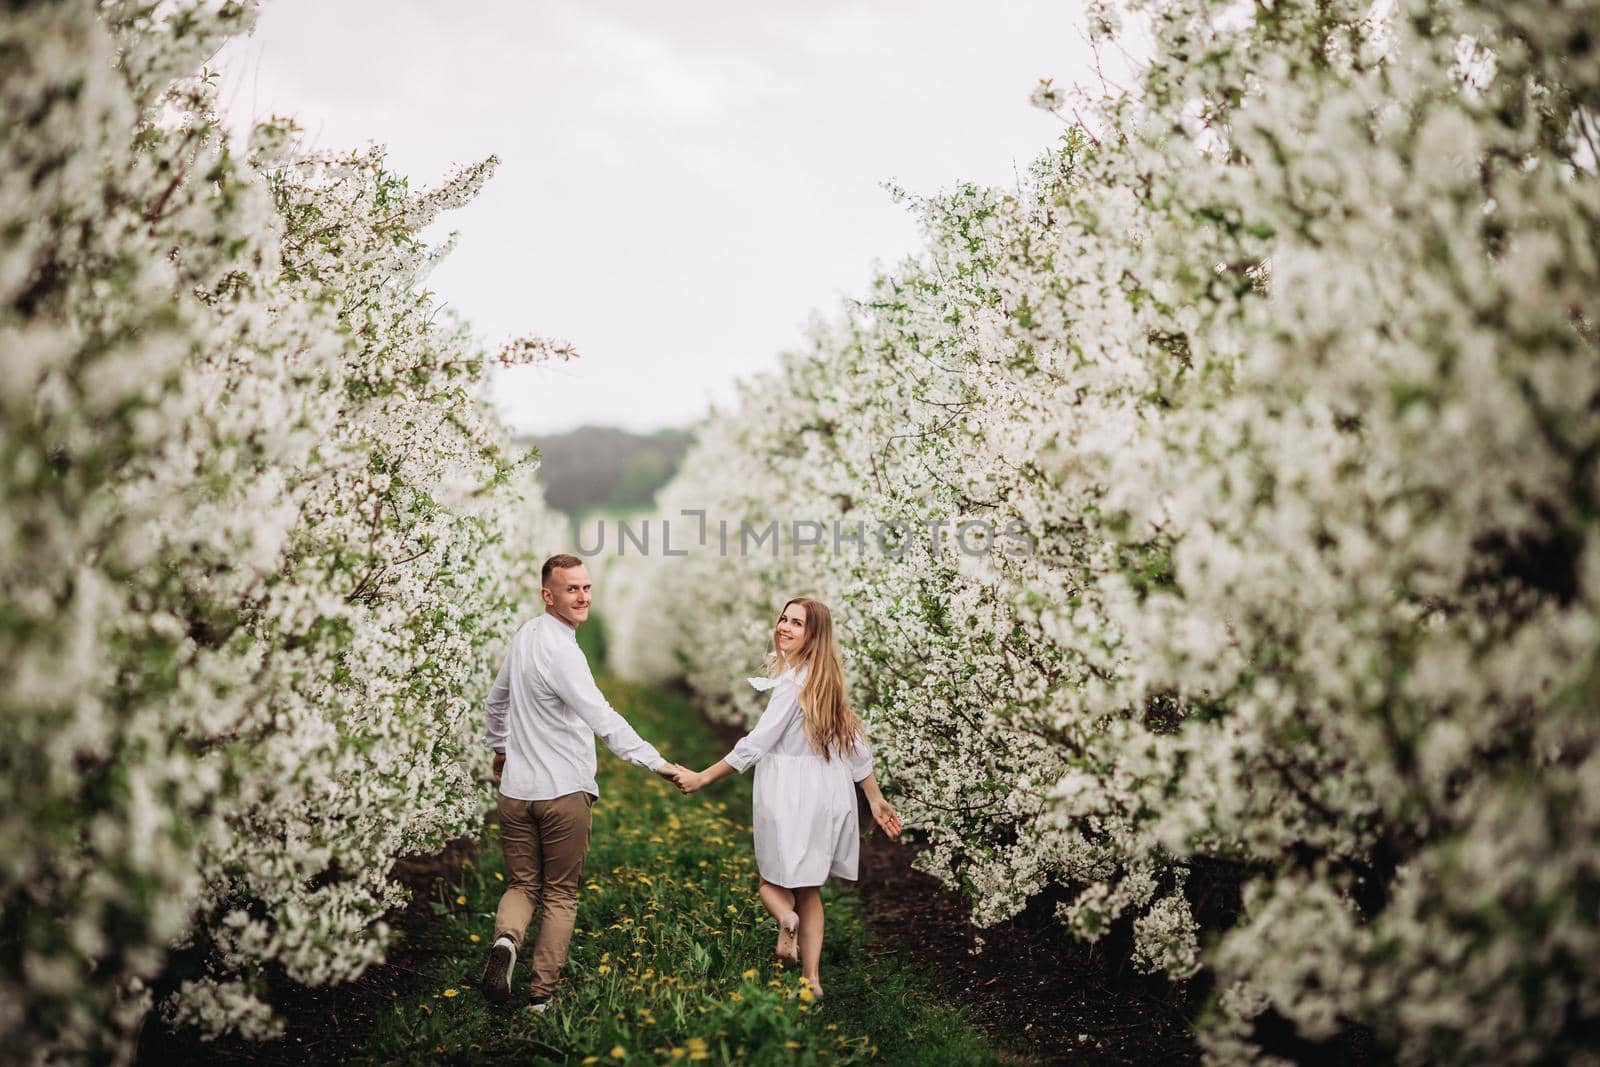 Happy family couple in spring blooming apple orchard. Young couple in love enjoy each other while walking in the garden. The man holds the woman's hand. Family relationships by Dmitrytph